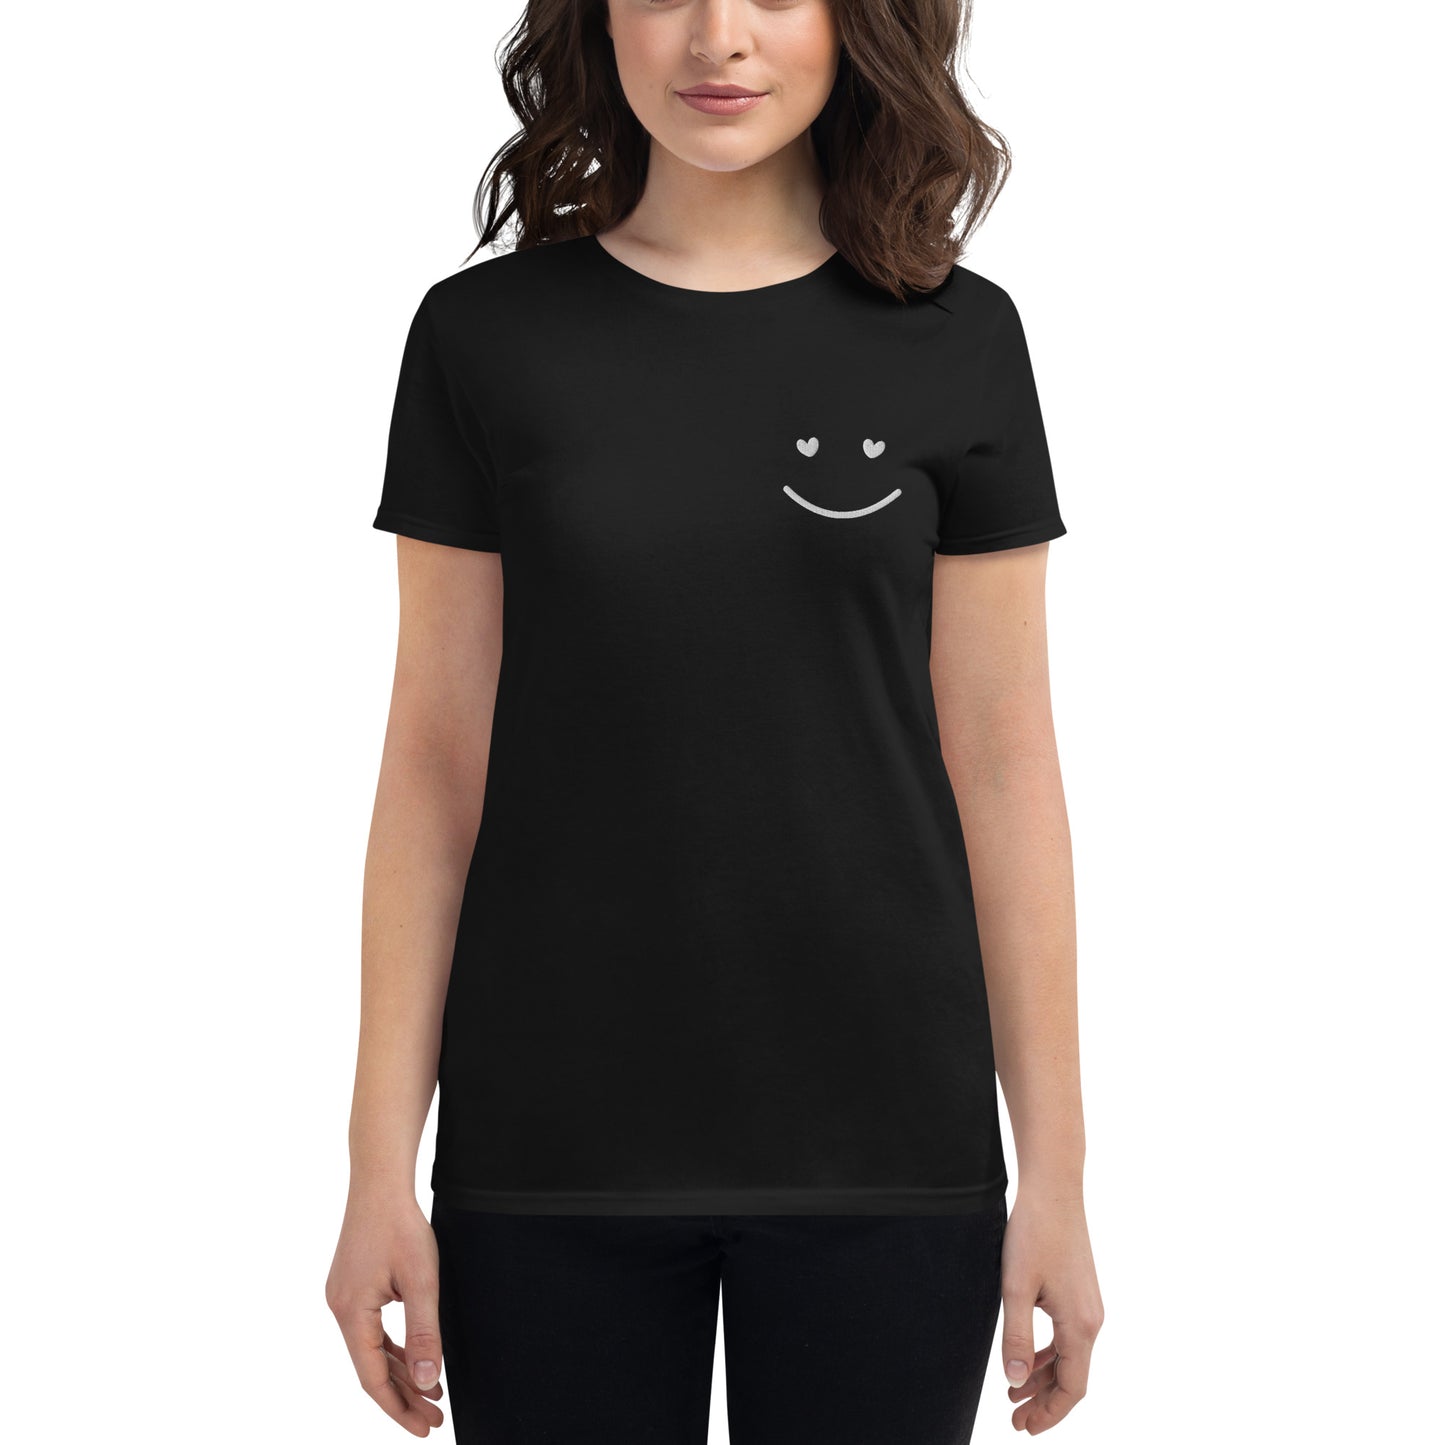 Smiling Heart Eyes Embroidered Women's T-Shirt